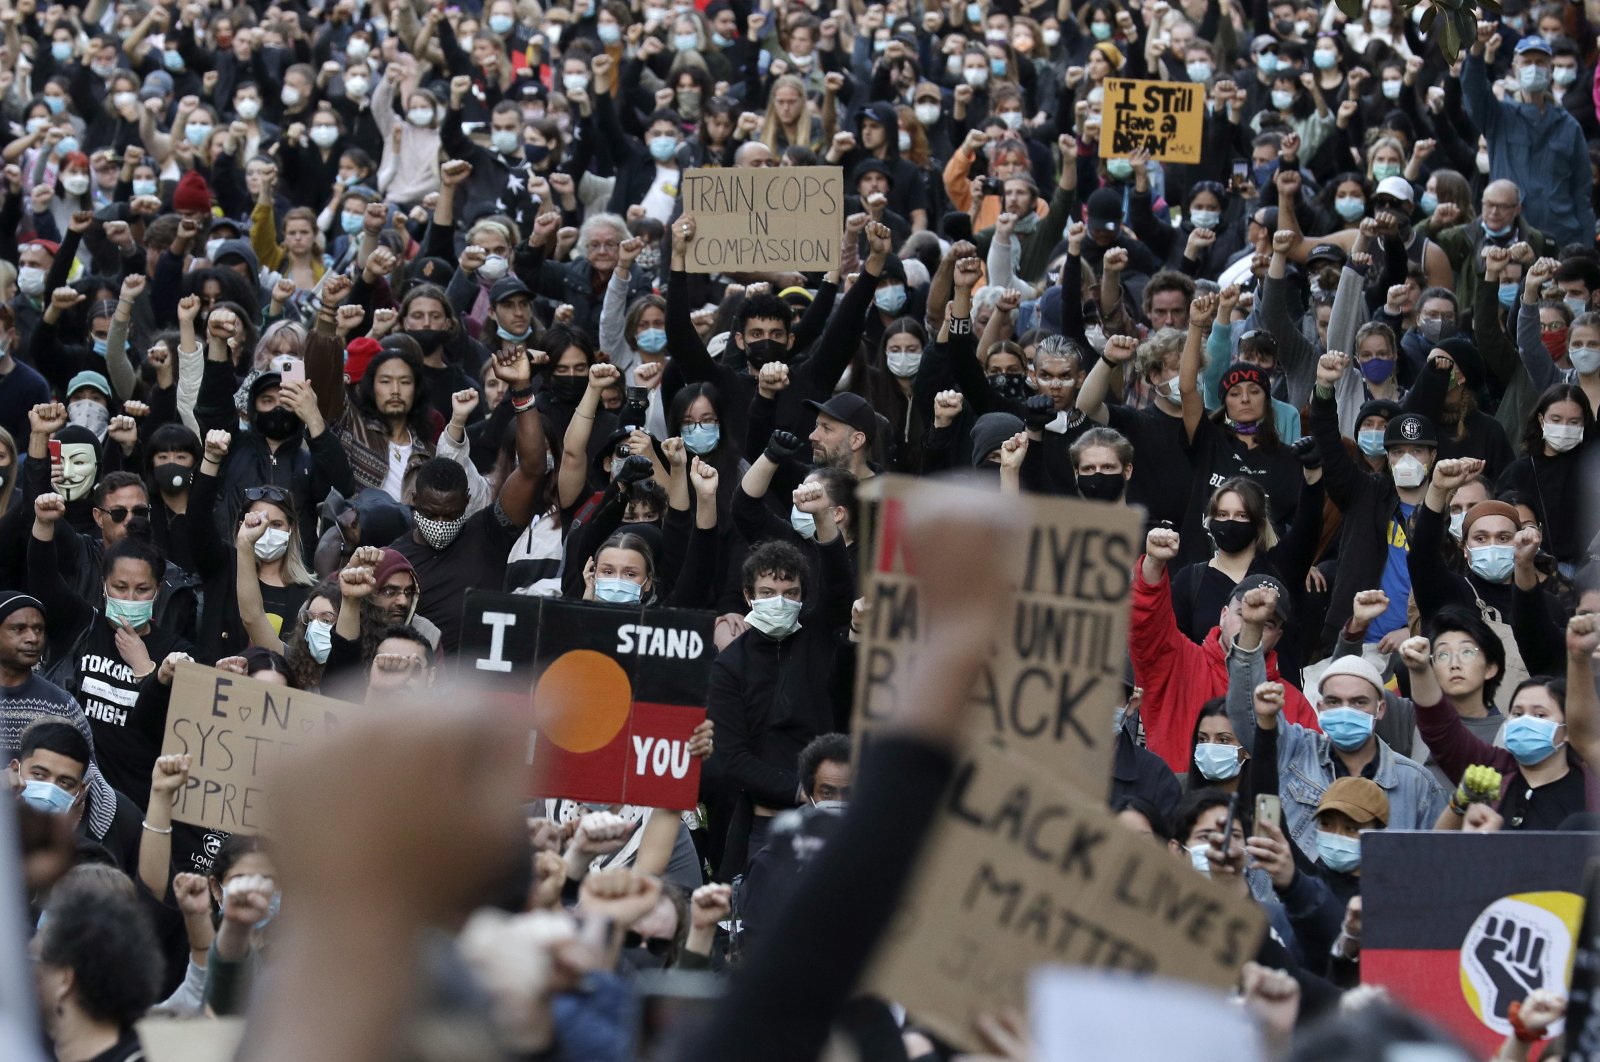 Protesters gather in Sydney, Saturday, June 6, 2020, to support the cause of U.S. protests over the death of George Floyd. (AP Photo)